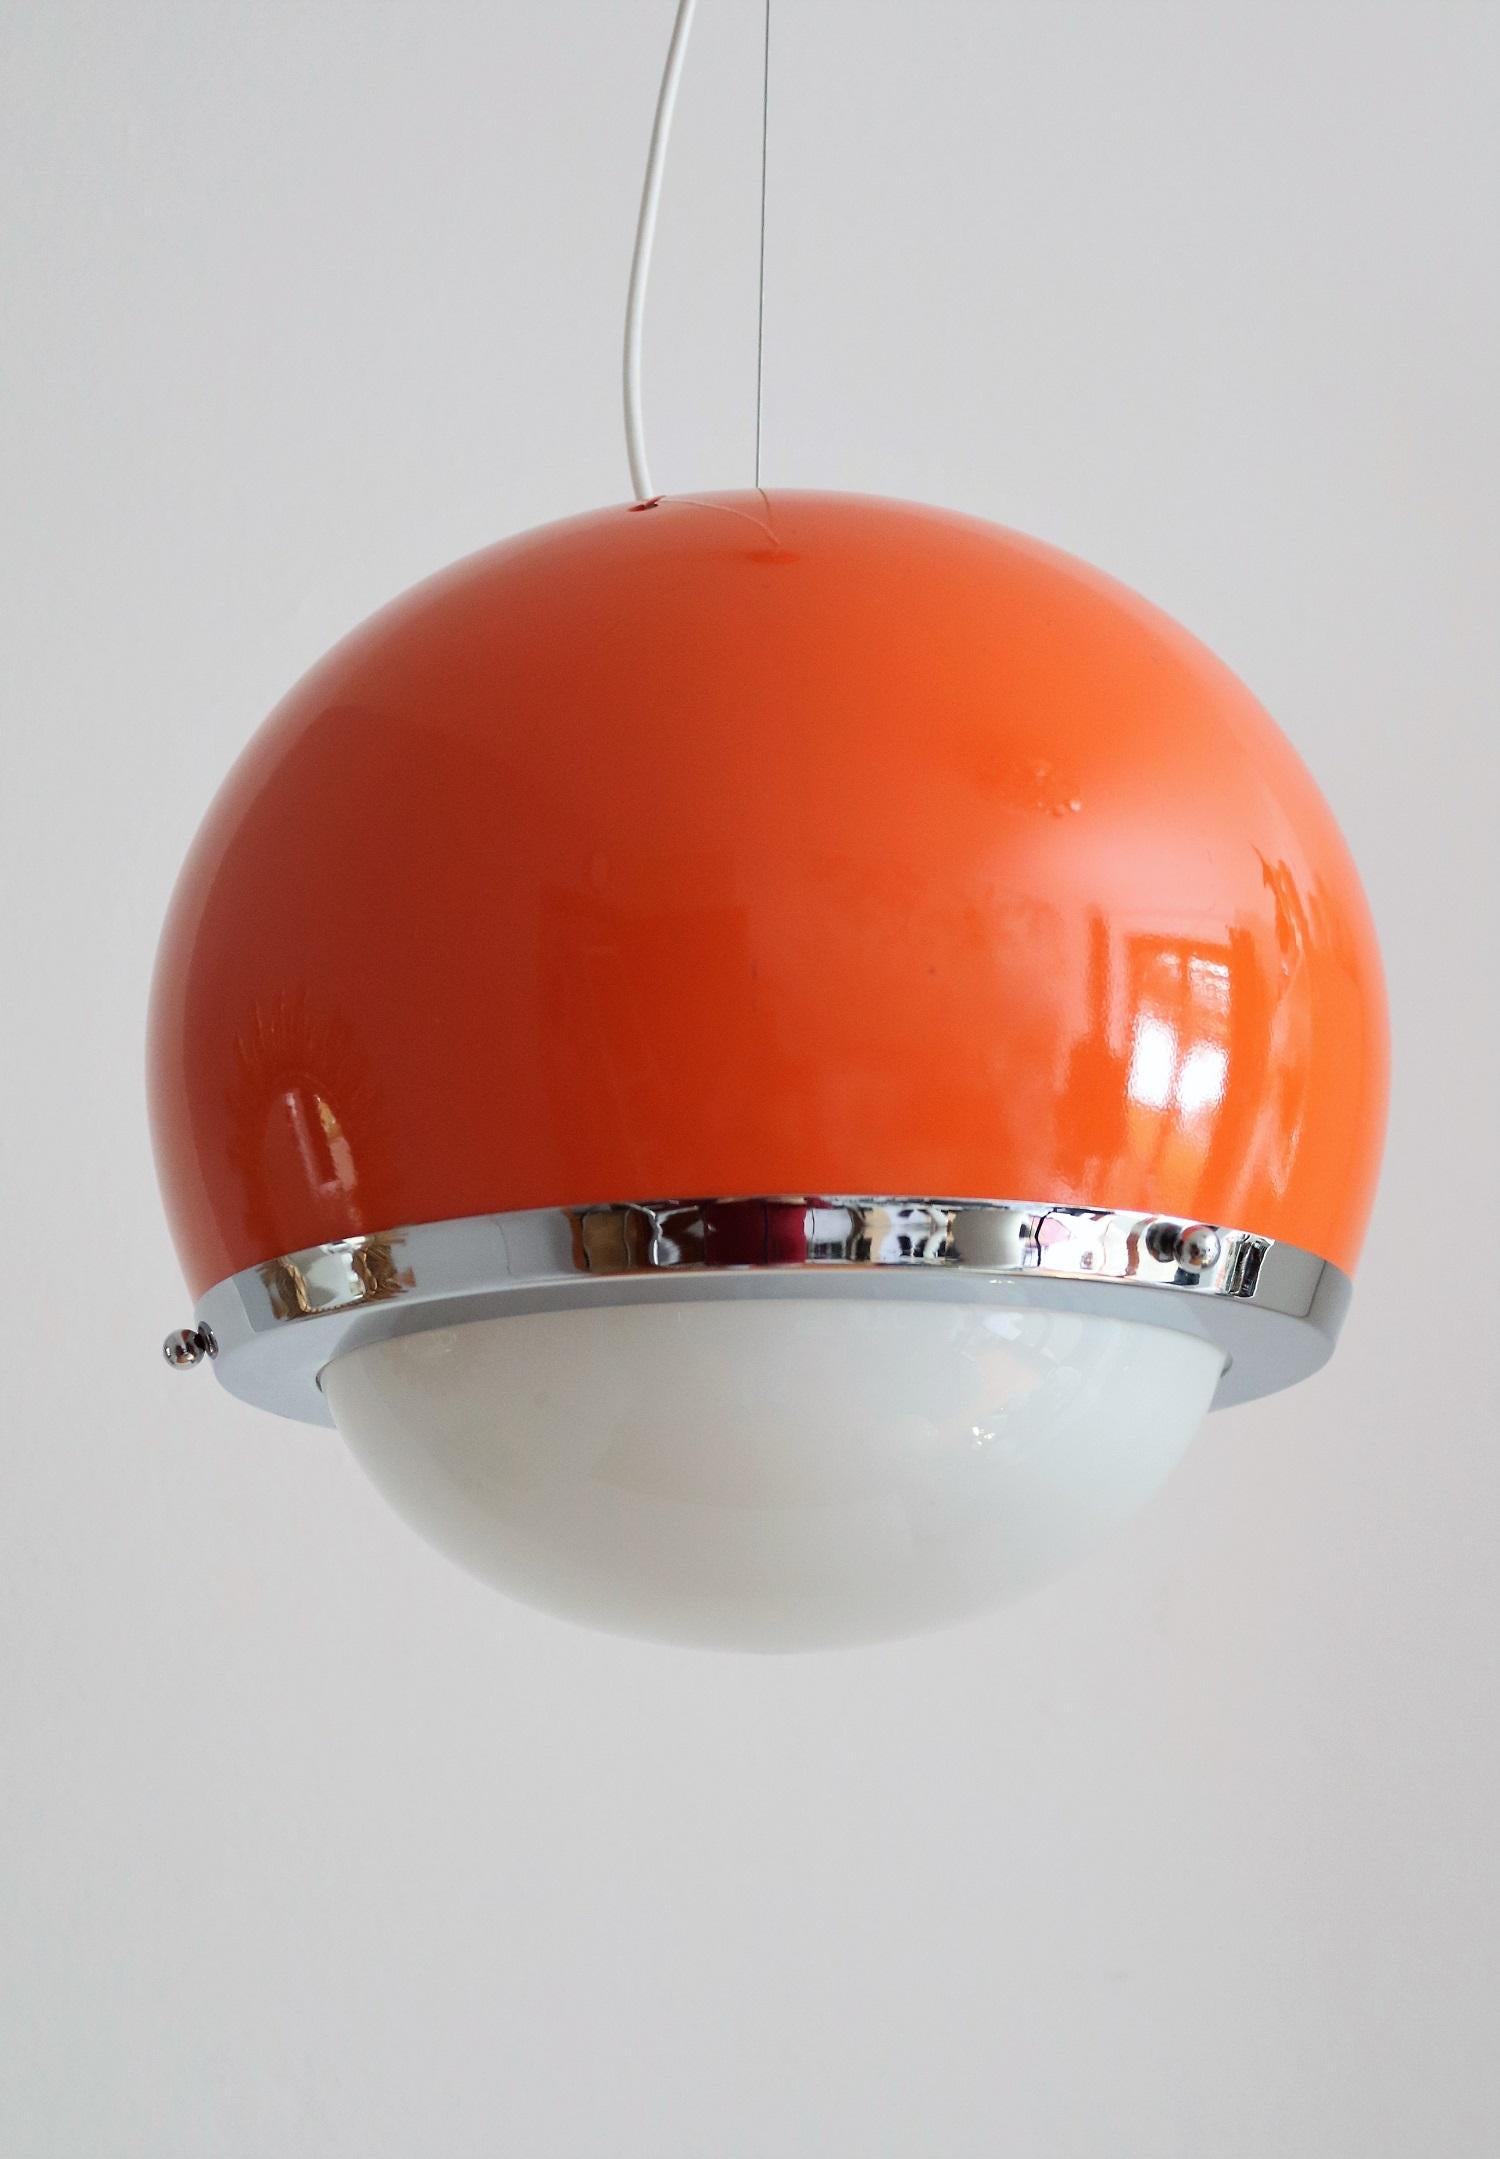 Italian Midcentury Pendant Lamp from the Space Age in Glass and Aluminium, 1960s For Sale 9